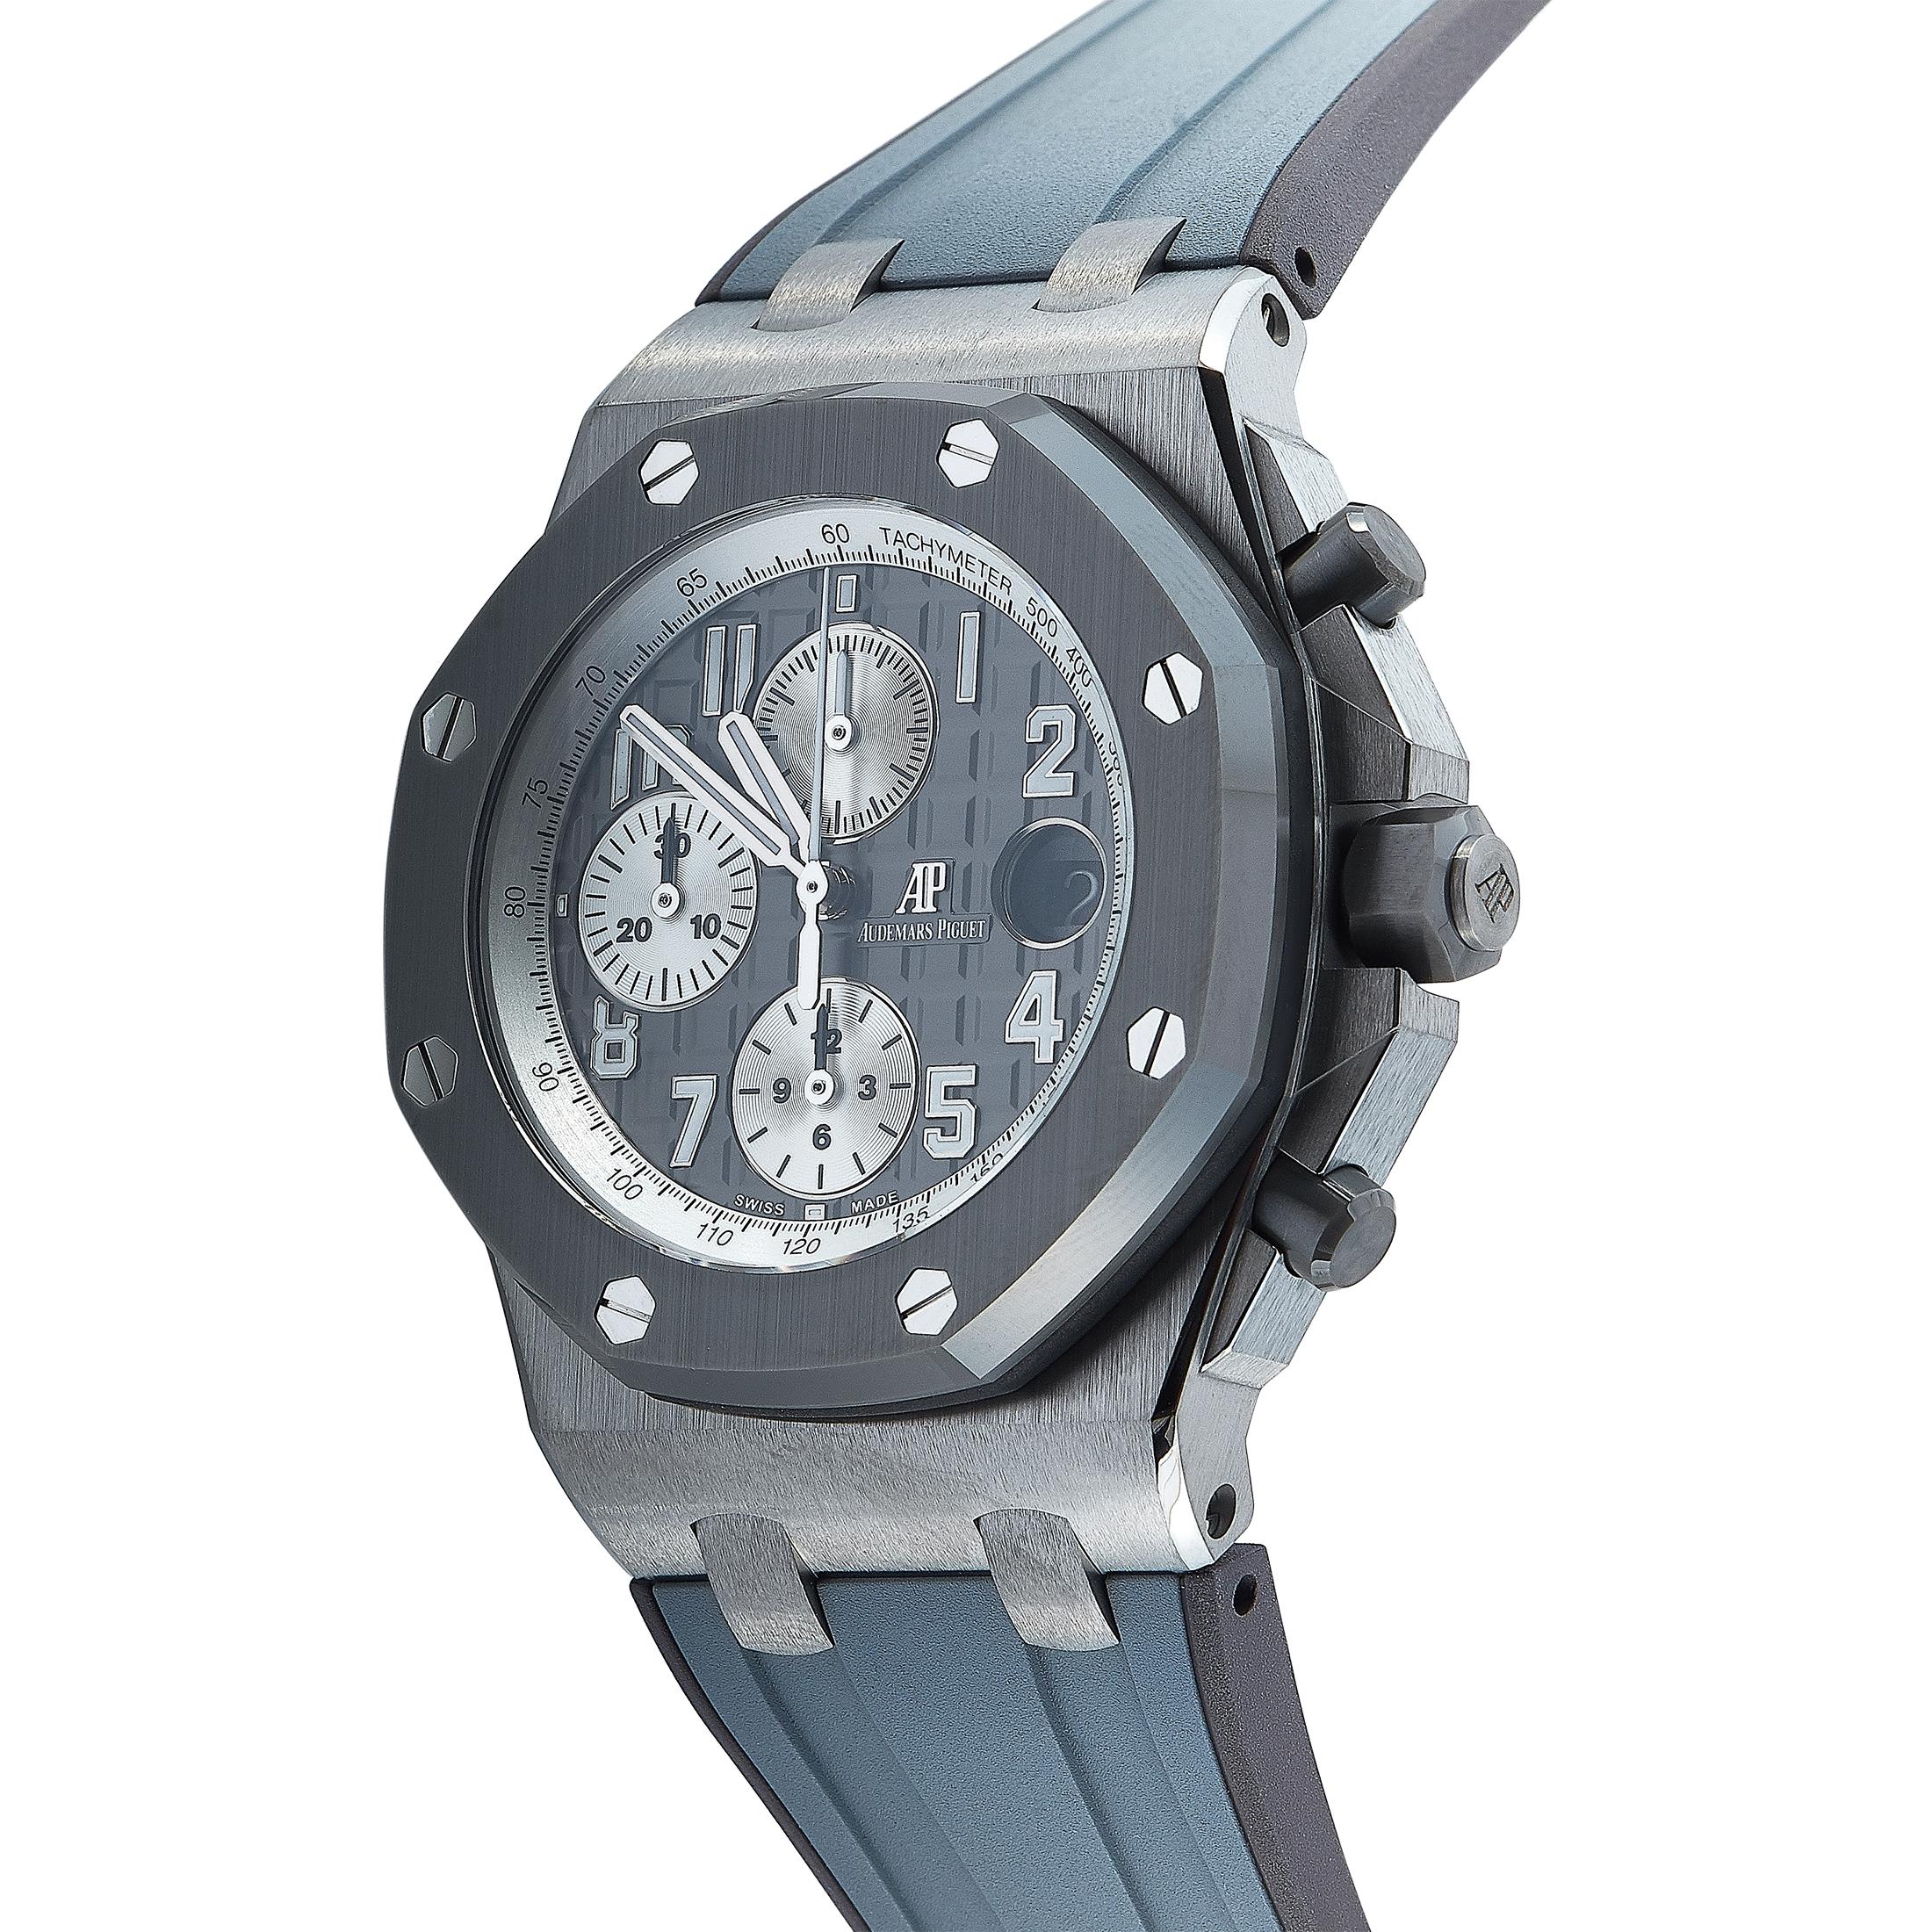 The Audemars Piguet Royal Oak Offshore Selfwinding Chronograph, reference number 26470IO.OO.A006CA.01, is a member of the superb “Royal Oak Offshore” collection.

The watch is presented with a titanium case that boasts see-through sapphire crystal